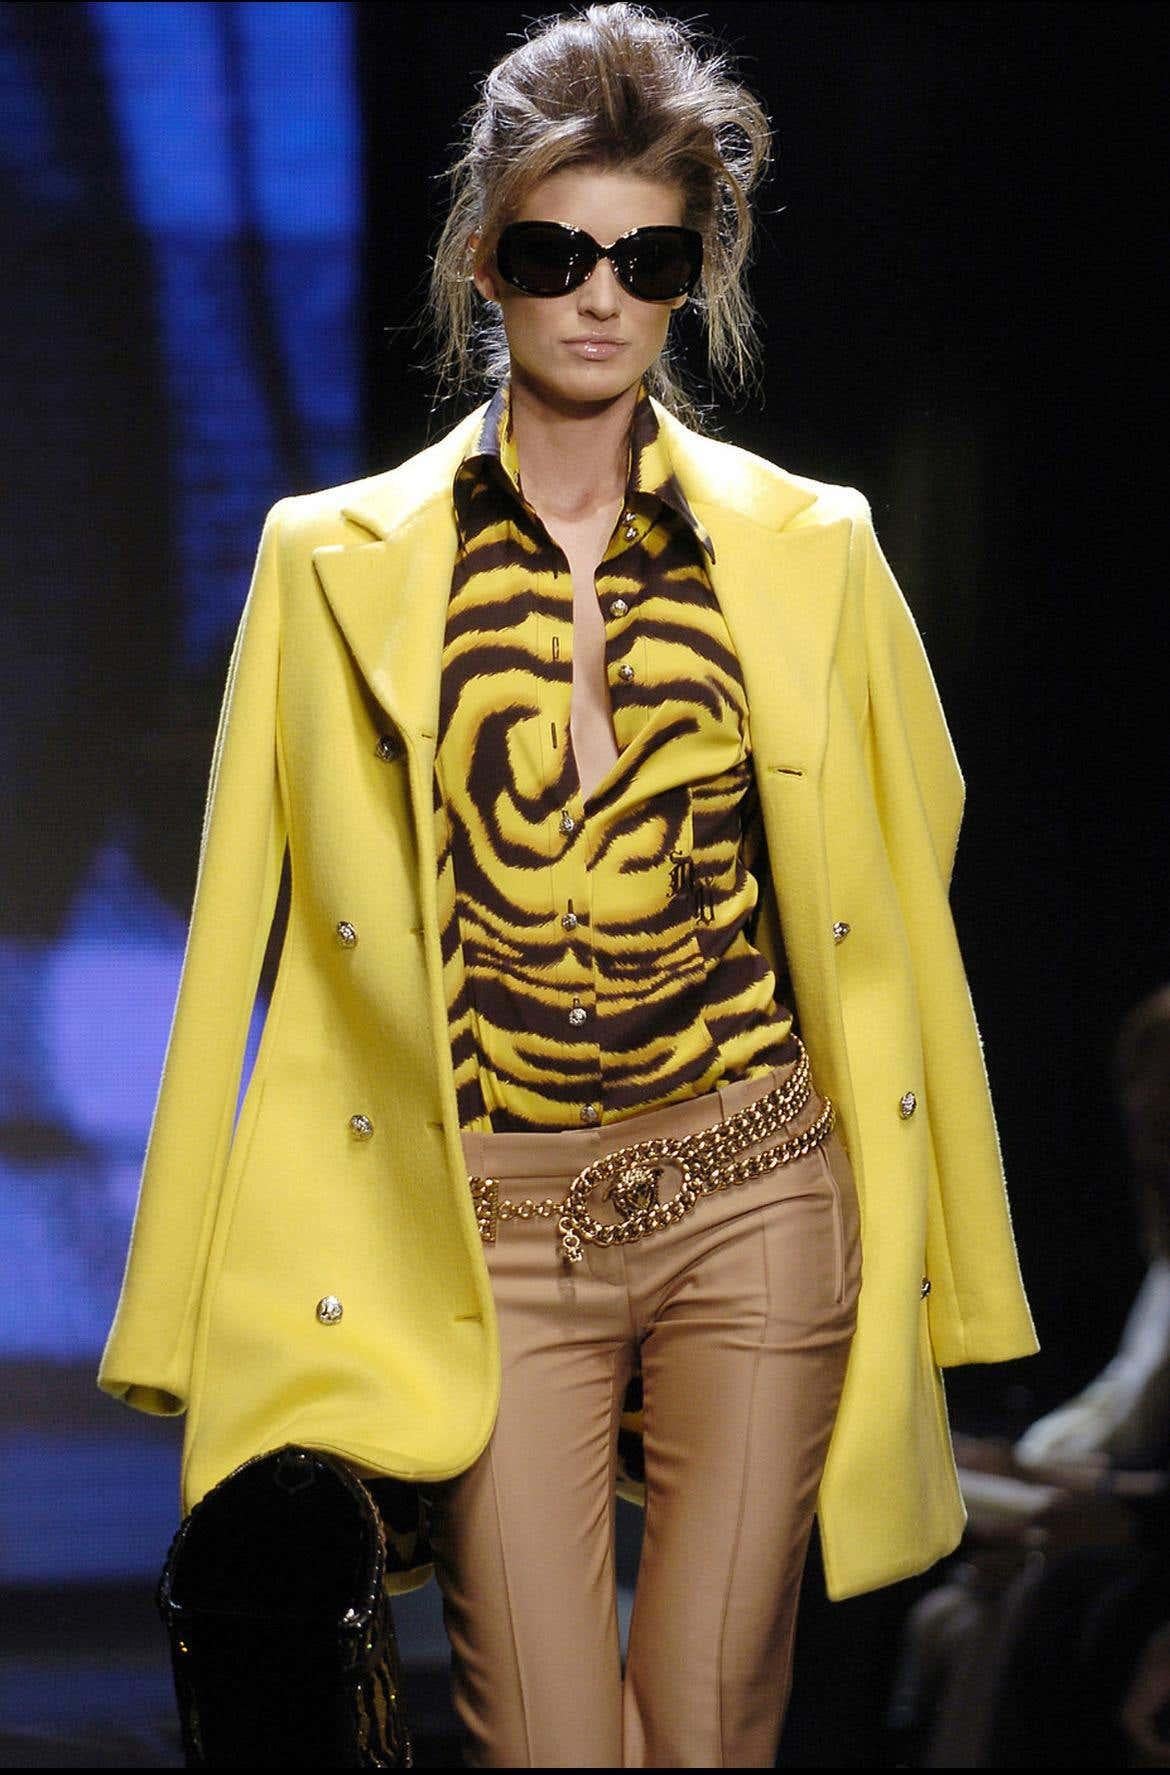 Presenting a beautiful bold yellow and black tiger stripe Versace dress, designed by Donatella Versace. From the Fall/Winter 2004 collection, this beautiful print debuted on the season's runway in several looks. This form-fitting dress features a